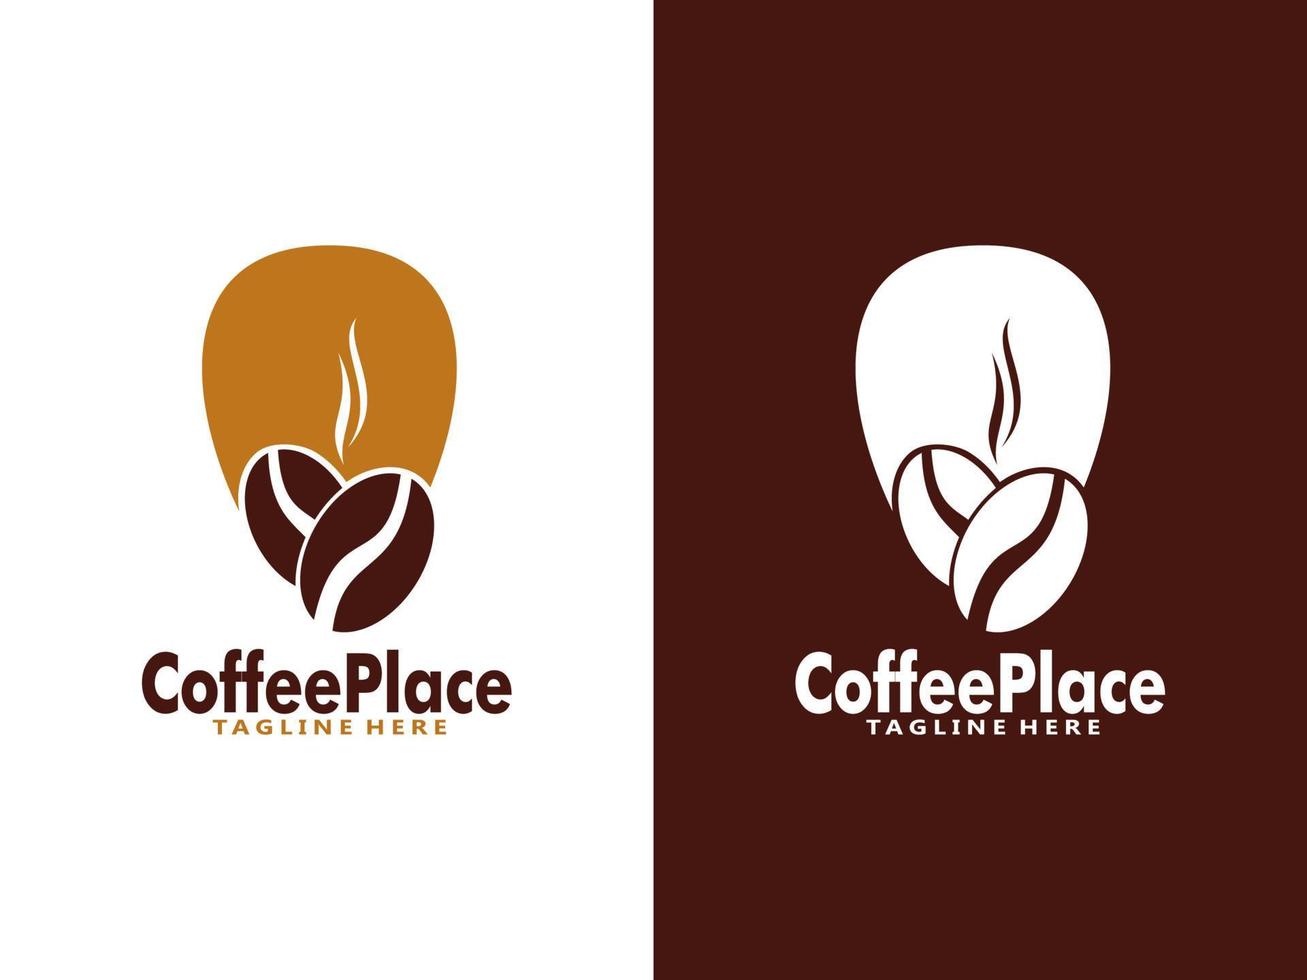 Coffee Place logo design template, Vector coffee logo for coffee shop and any business related to coffee.